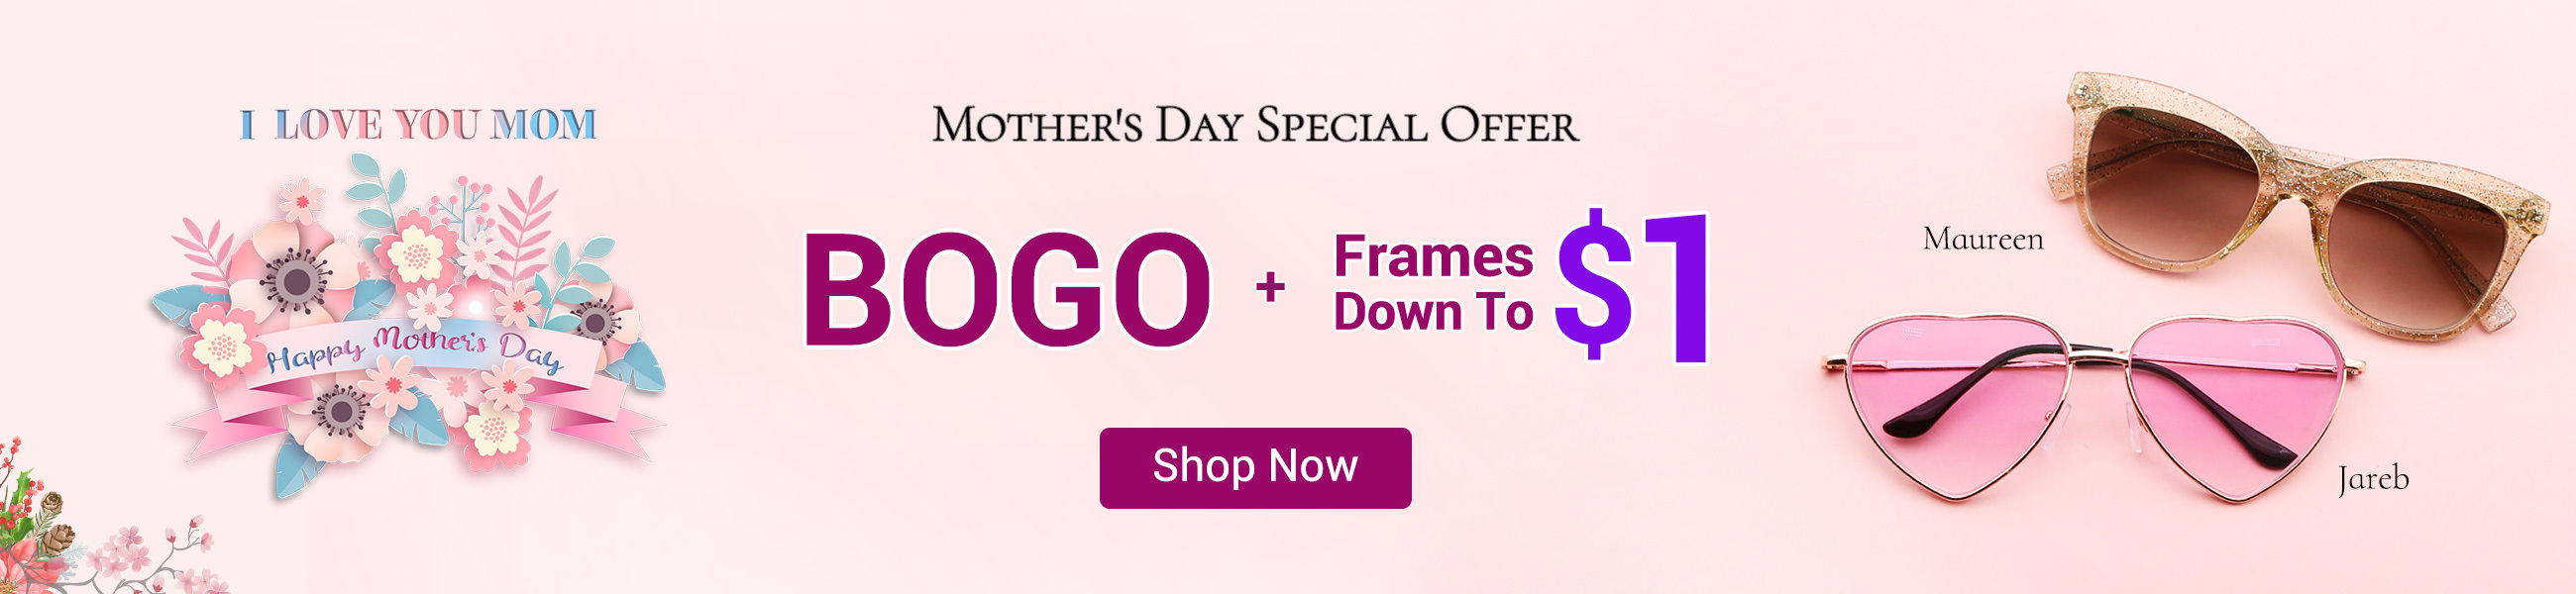 Mother's Day Sale, Buy 1 Get 1 Free